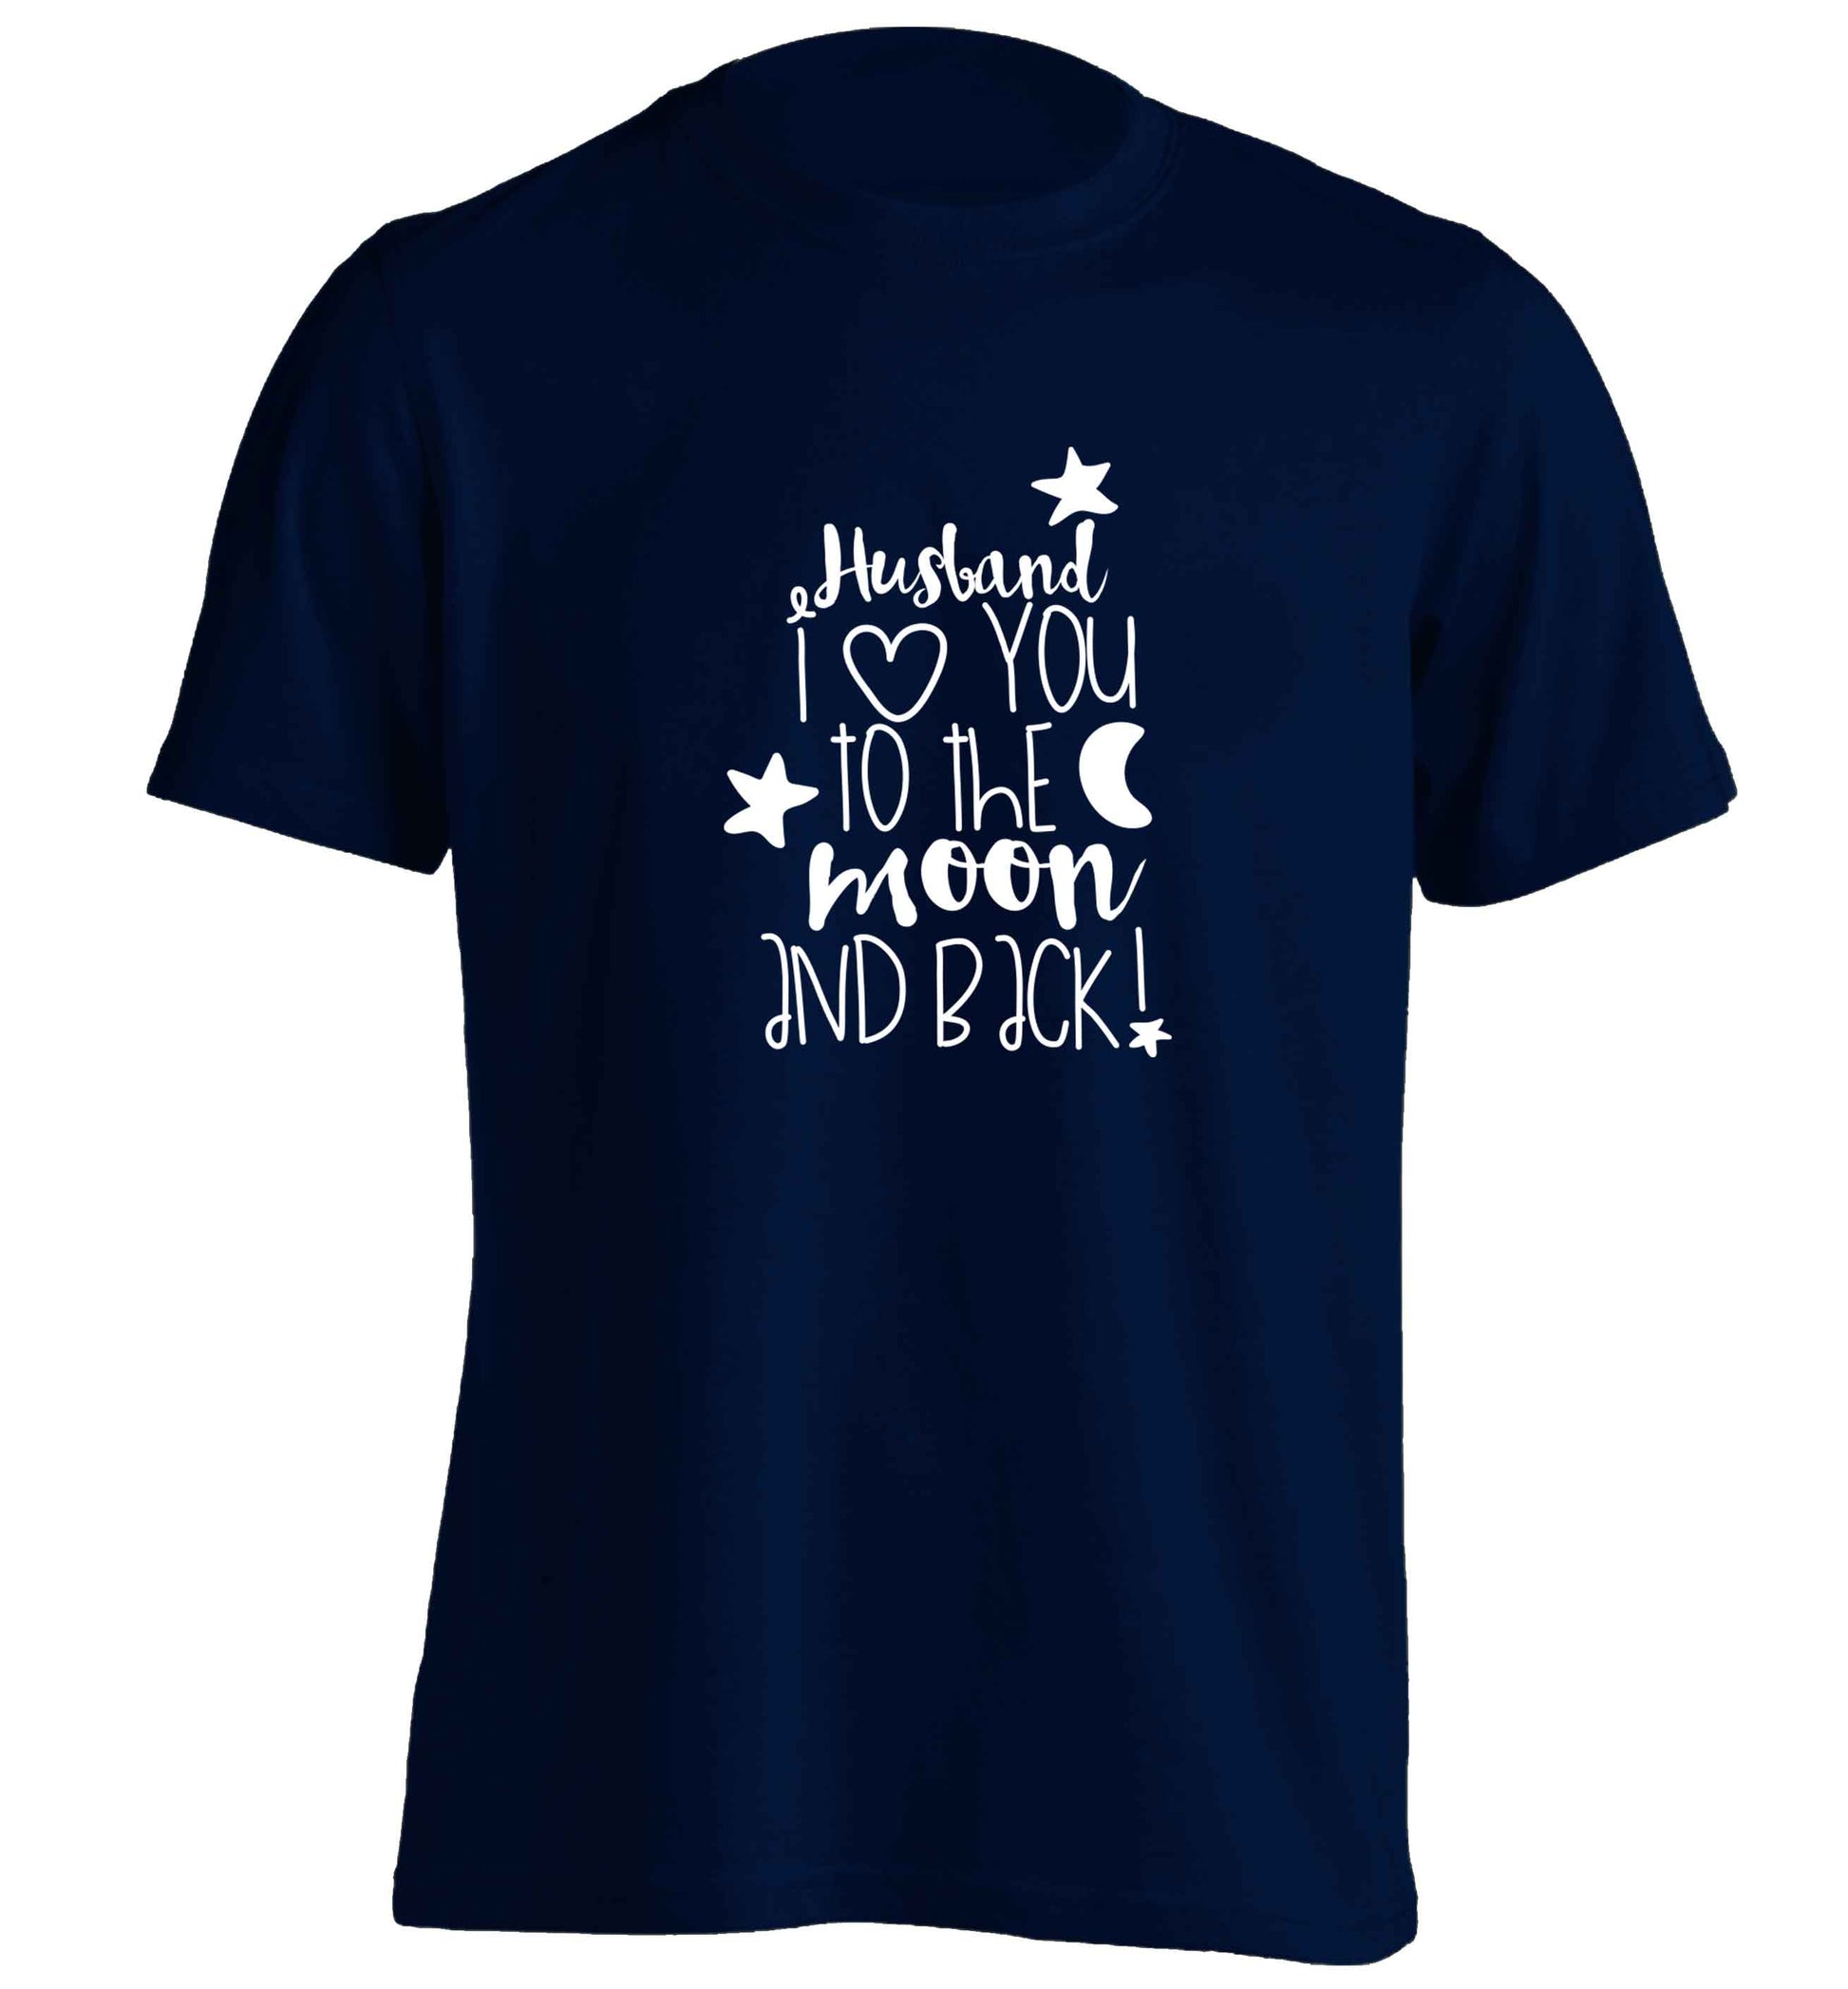 Husband I love you to the moon and back adults unisex navy Tshirt 2XL